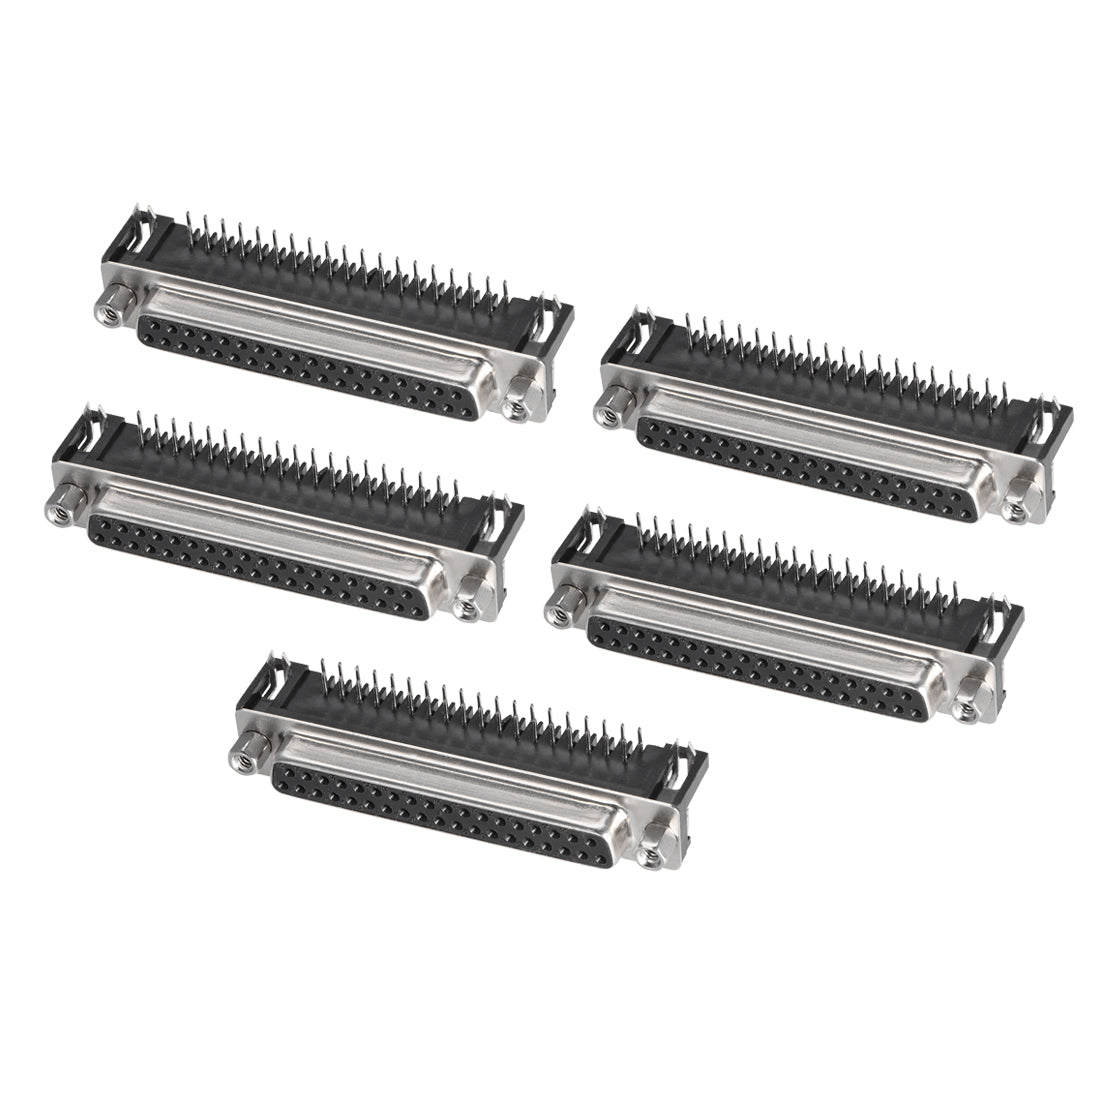 uxcell Uxcell D-sub Connector Female Socket 37-pin 2-row Right Angle Port Terminal Breakout for Mechanical Equipment Black 5pcs